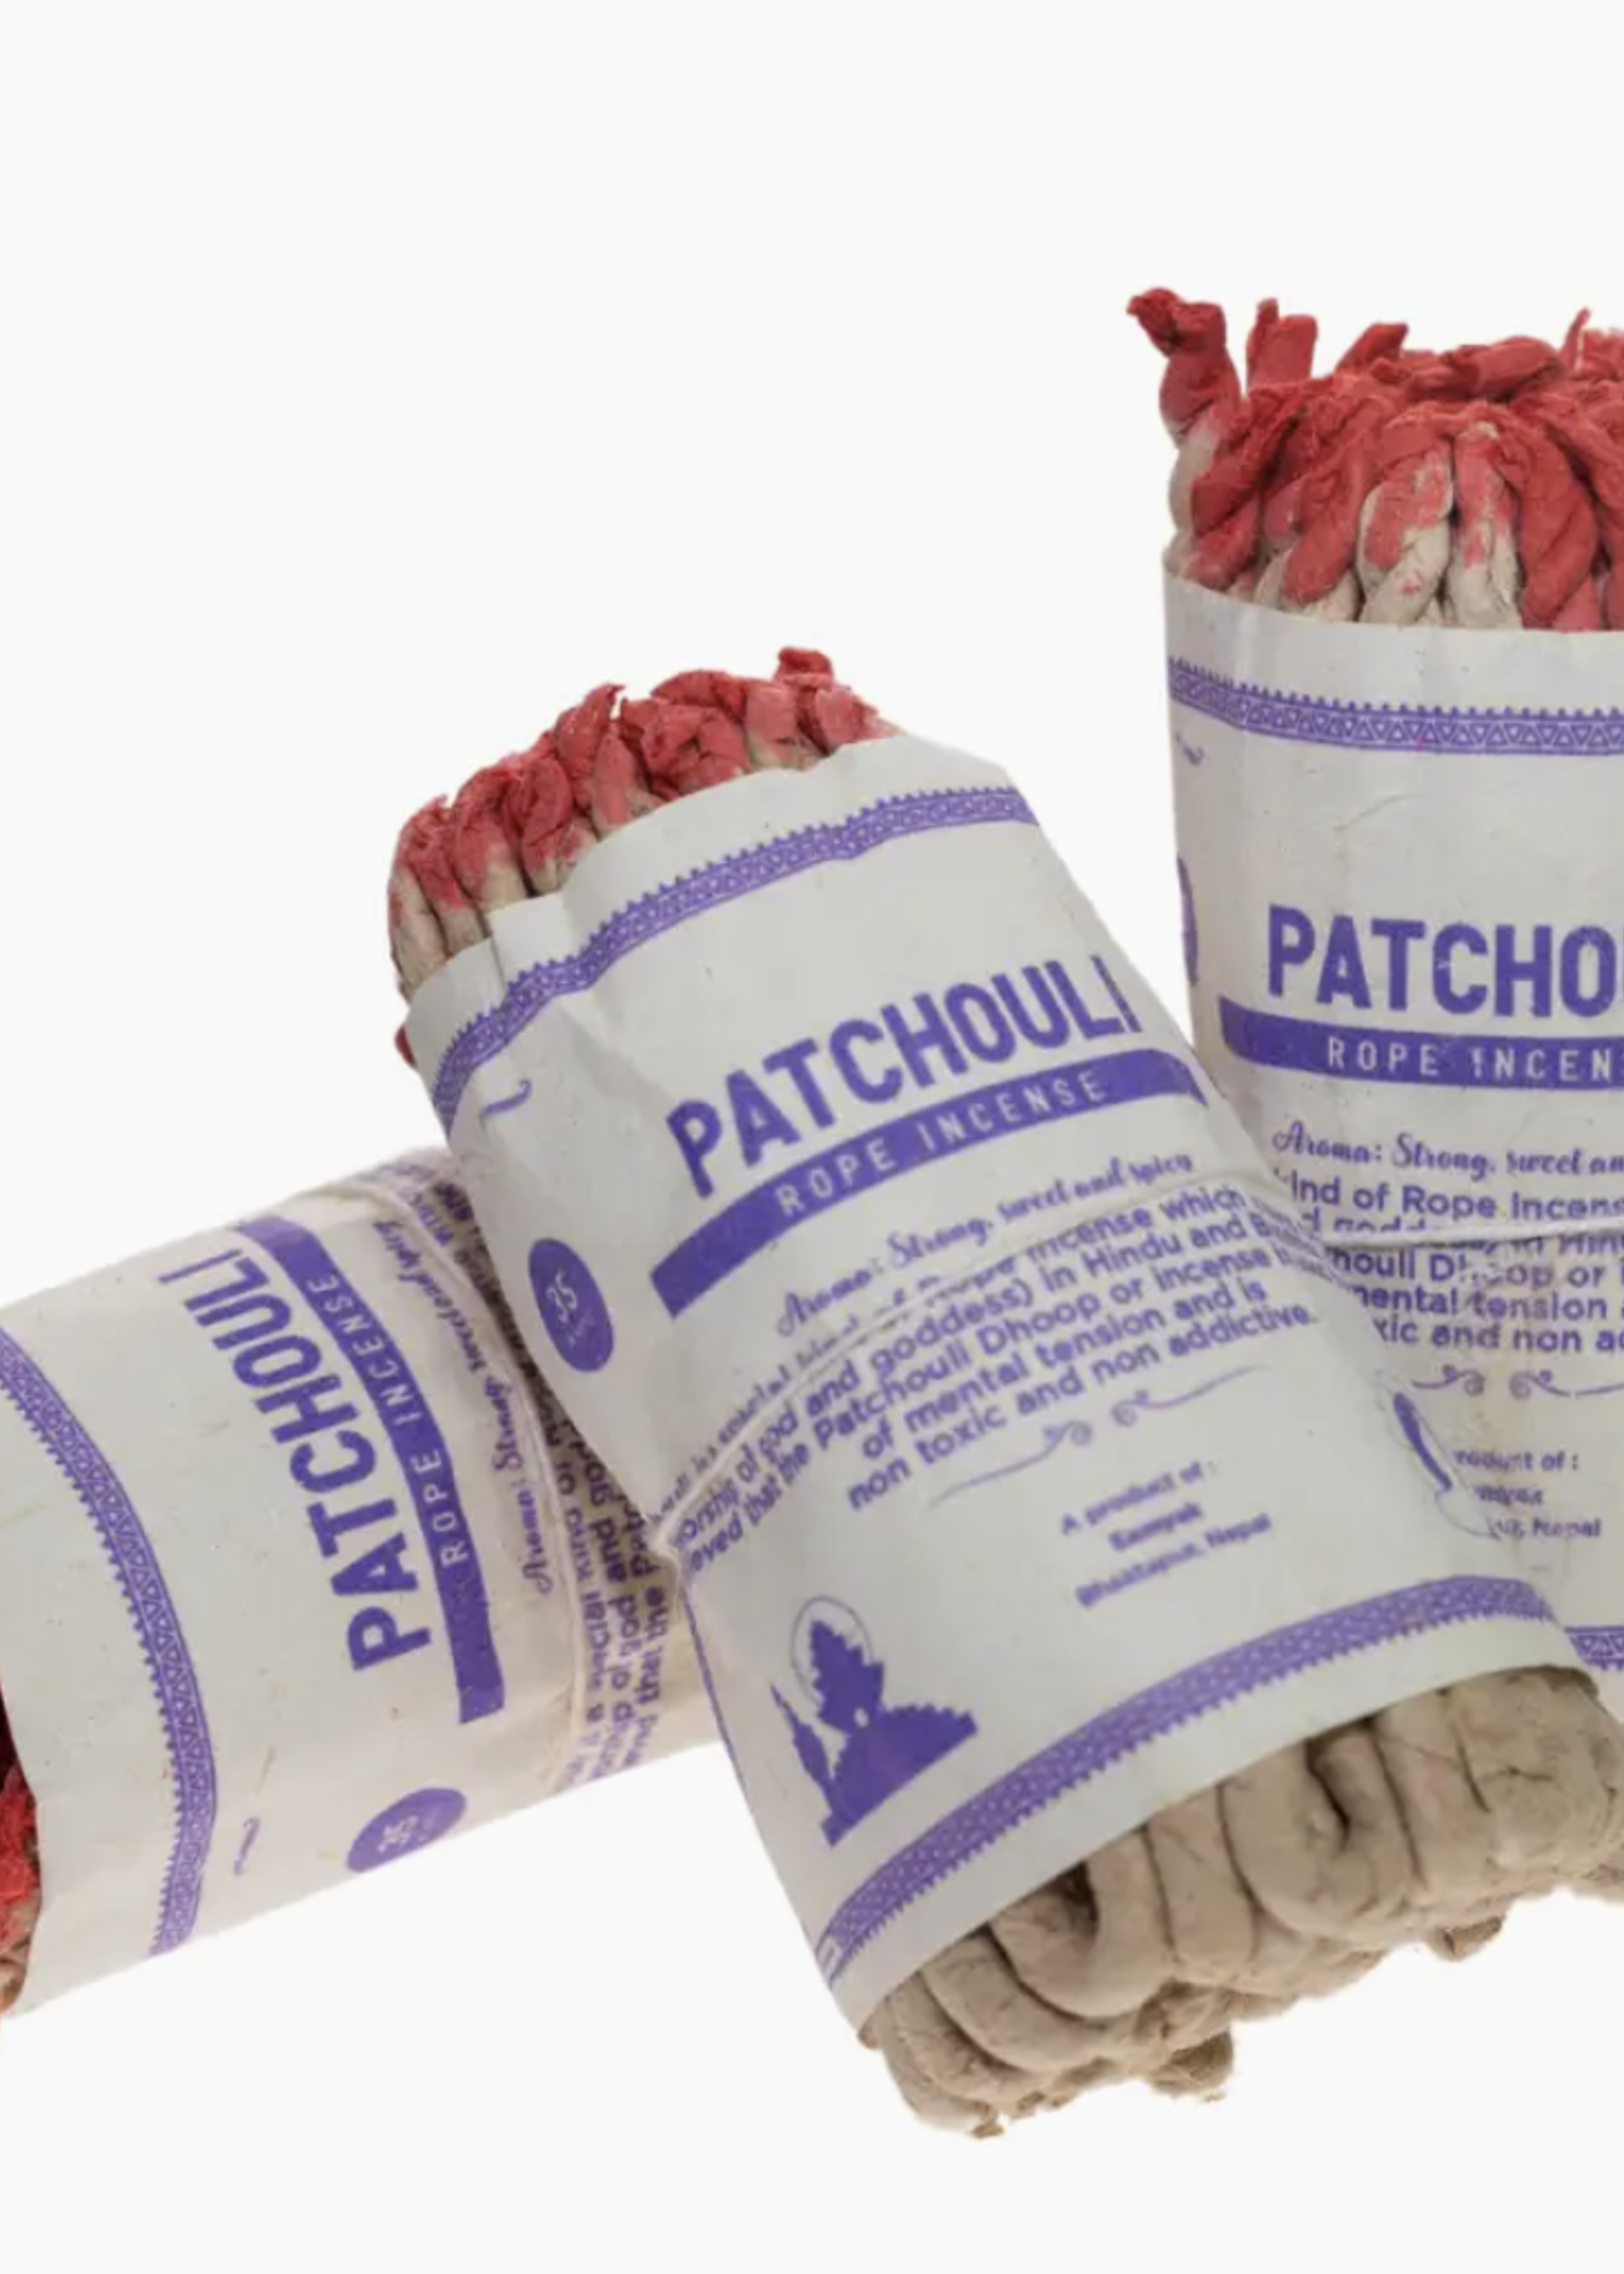 Down to Earth Patchouli Rope Incense